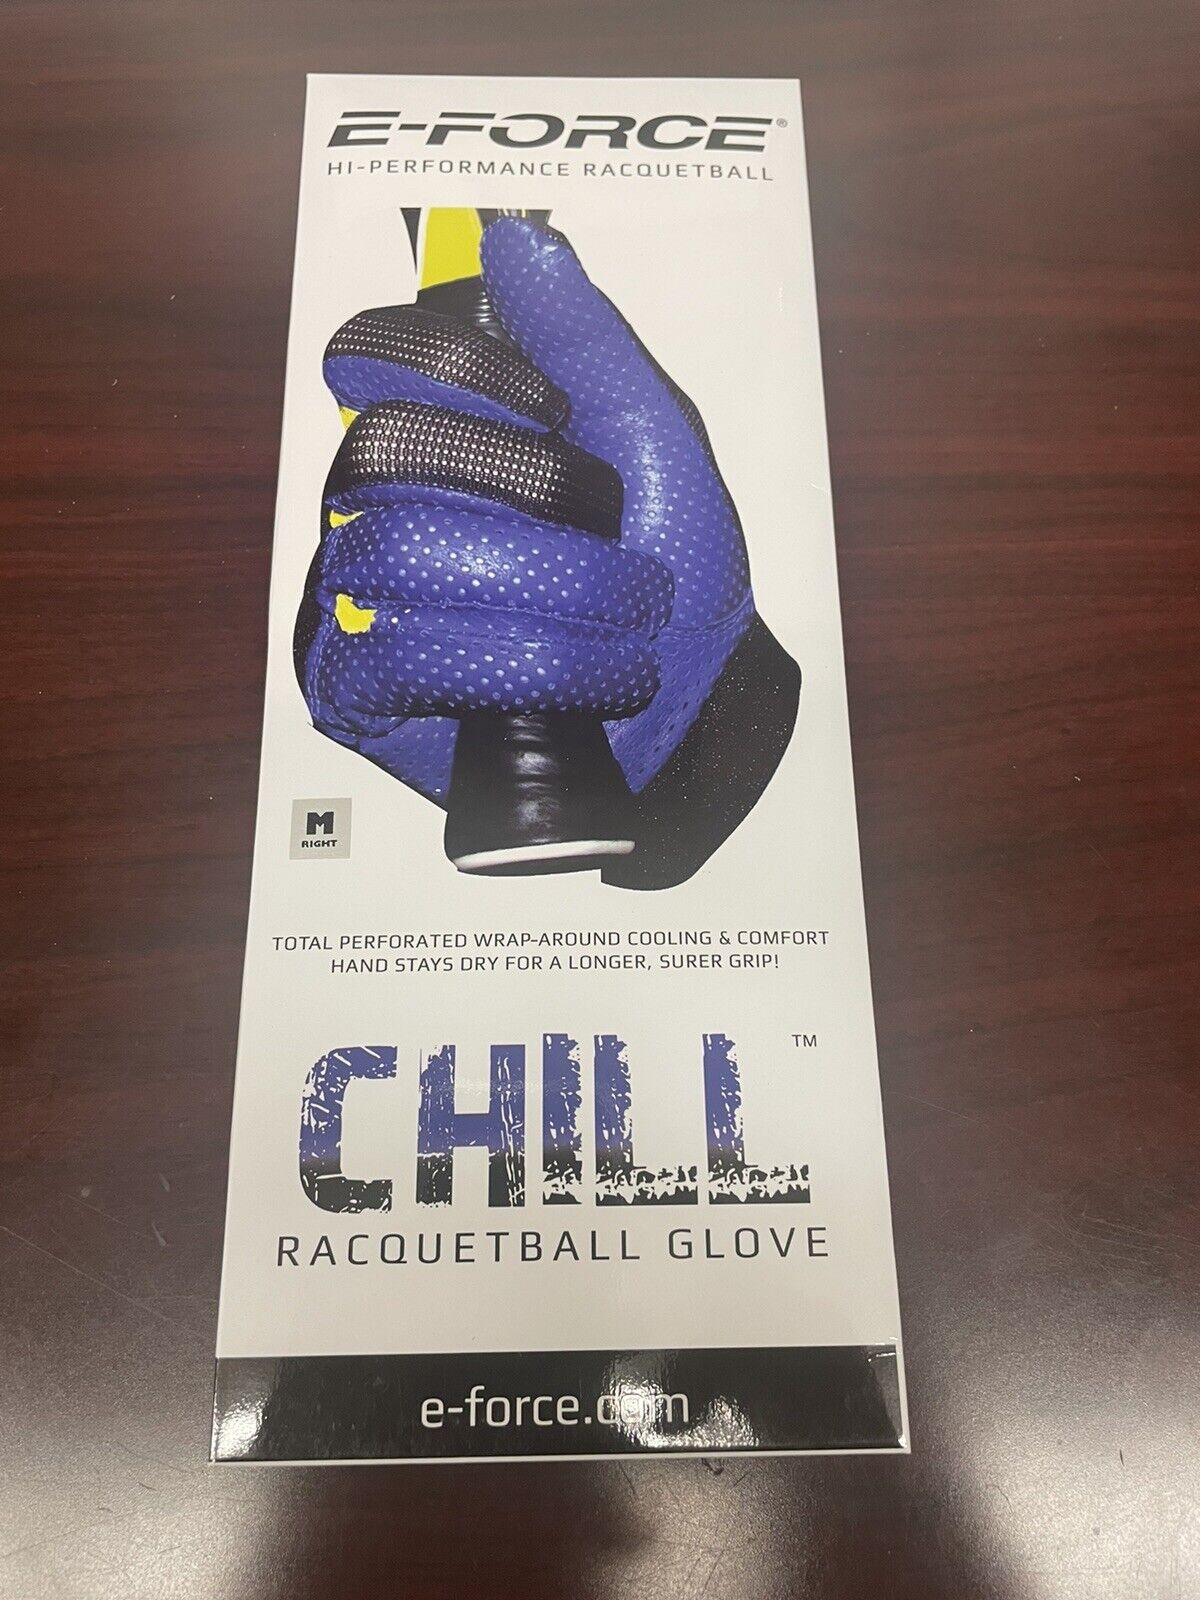 E-force Chill Racquetball Gloves